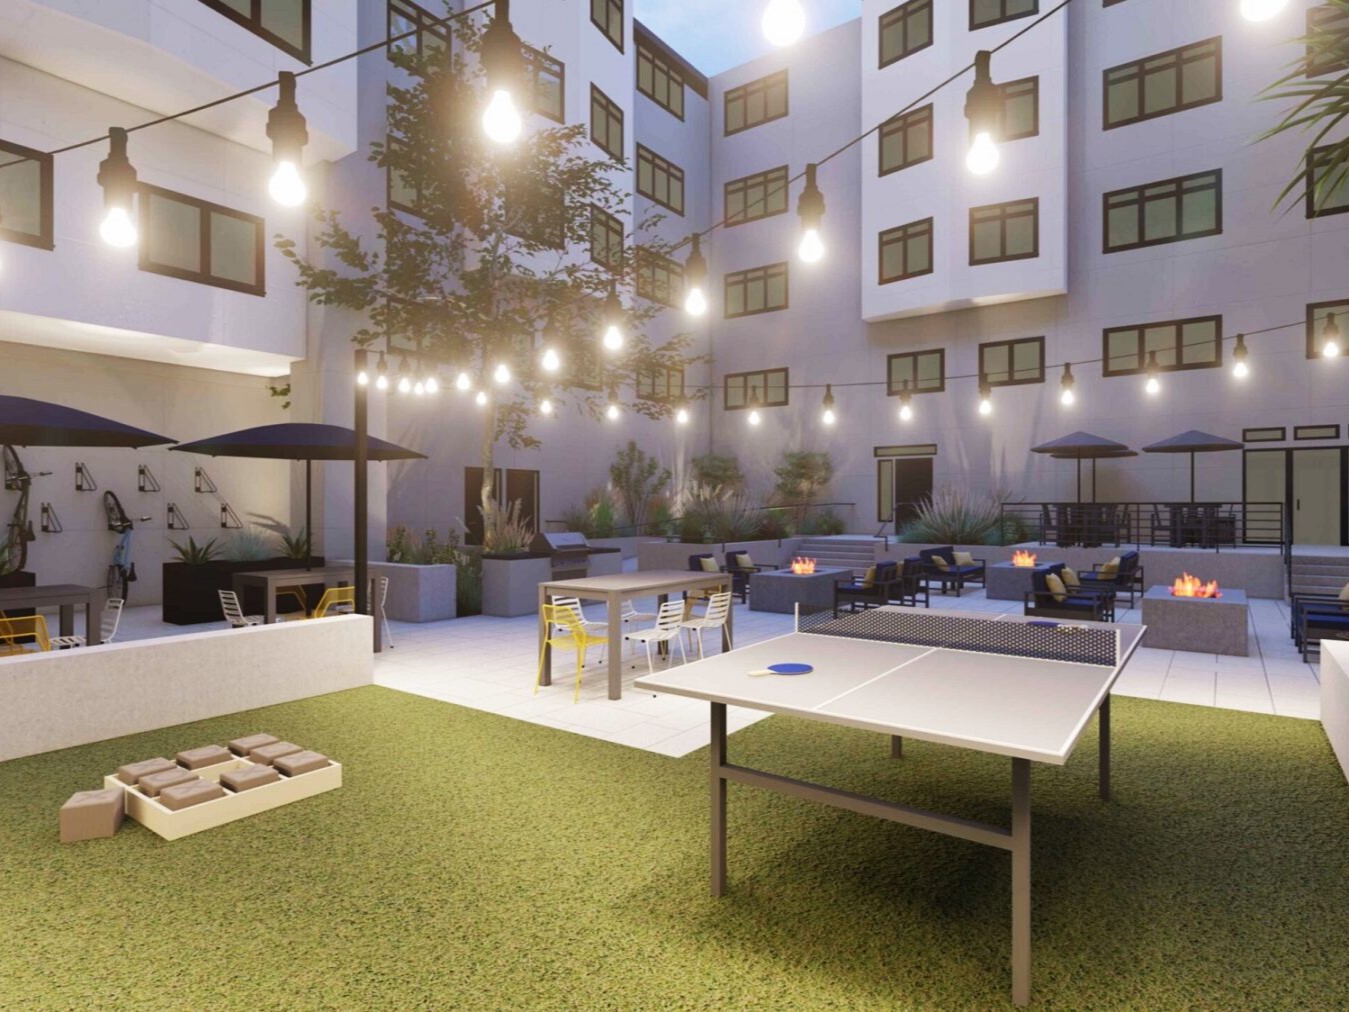 The new courtyard coming soon to Stadium Place Apartments.